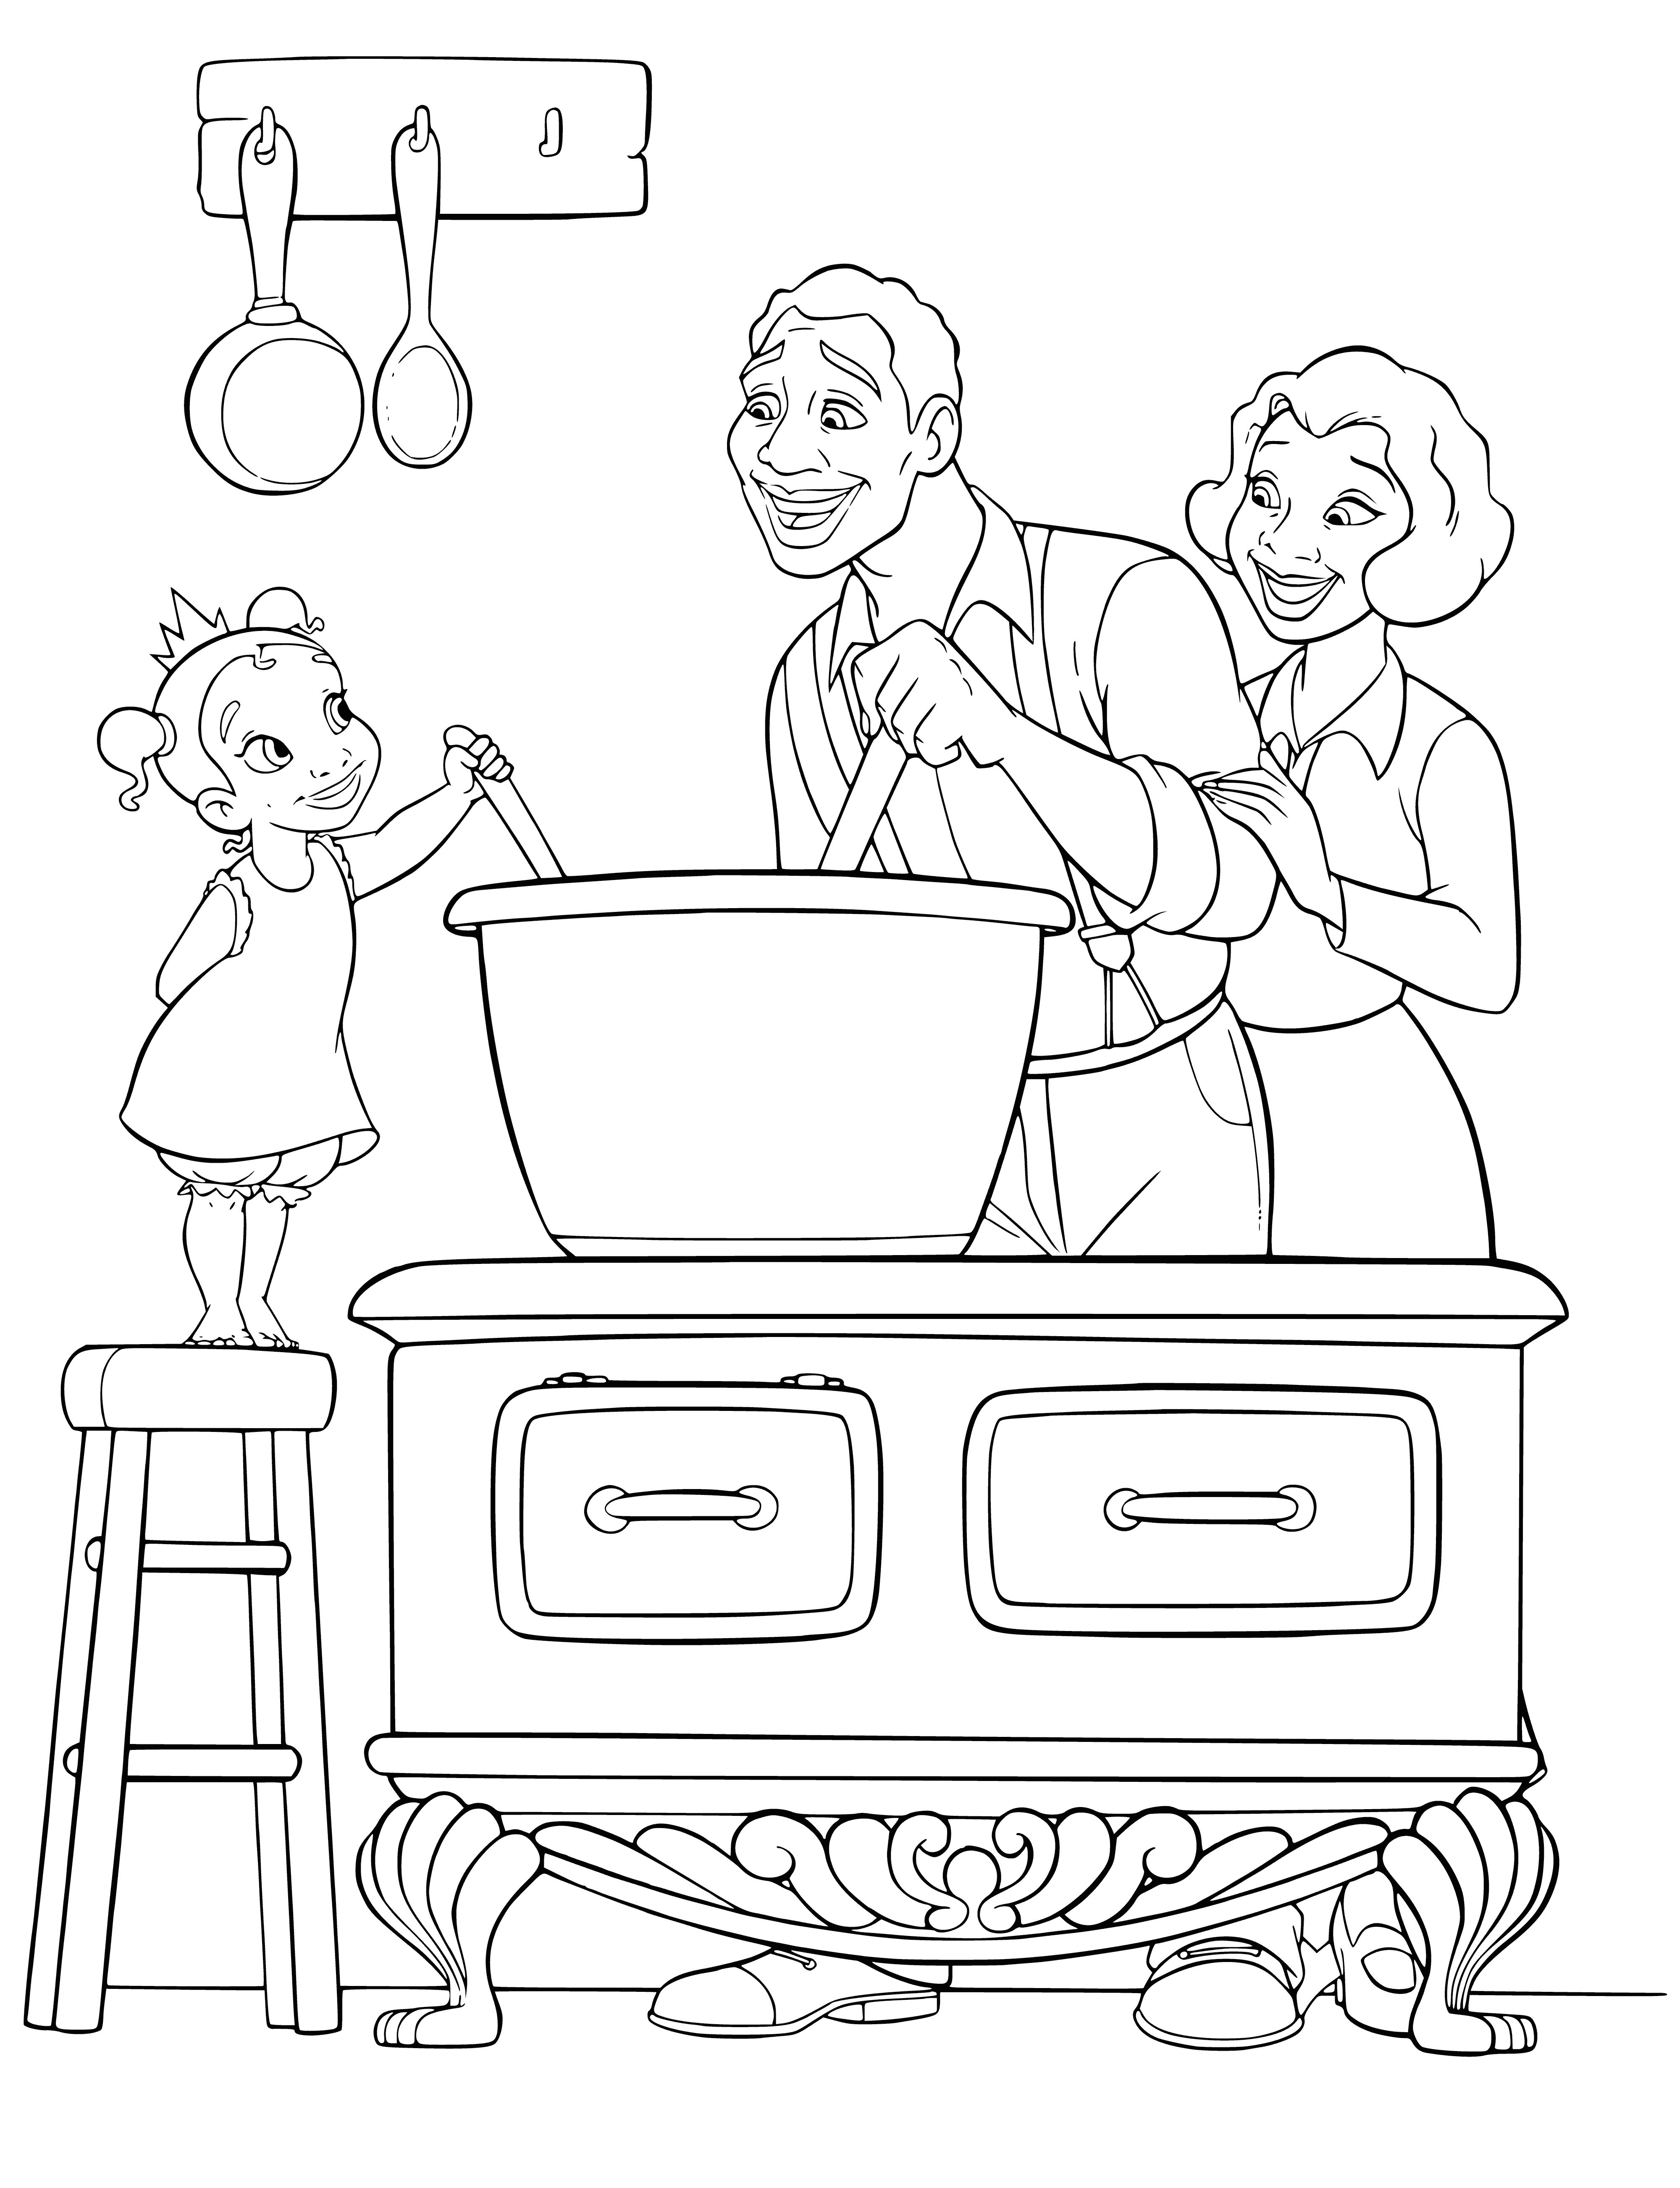 coloring page: Tiana is a young black girl cooking up her dreams in the kitchen. Gathered around her are various cooking utensils, eggs, flour, and sugar.